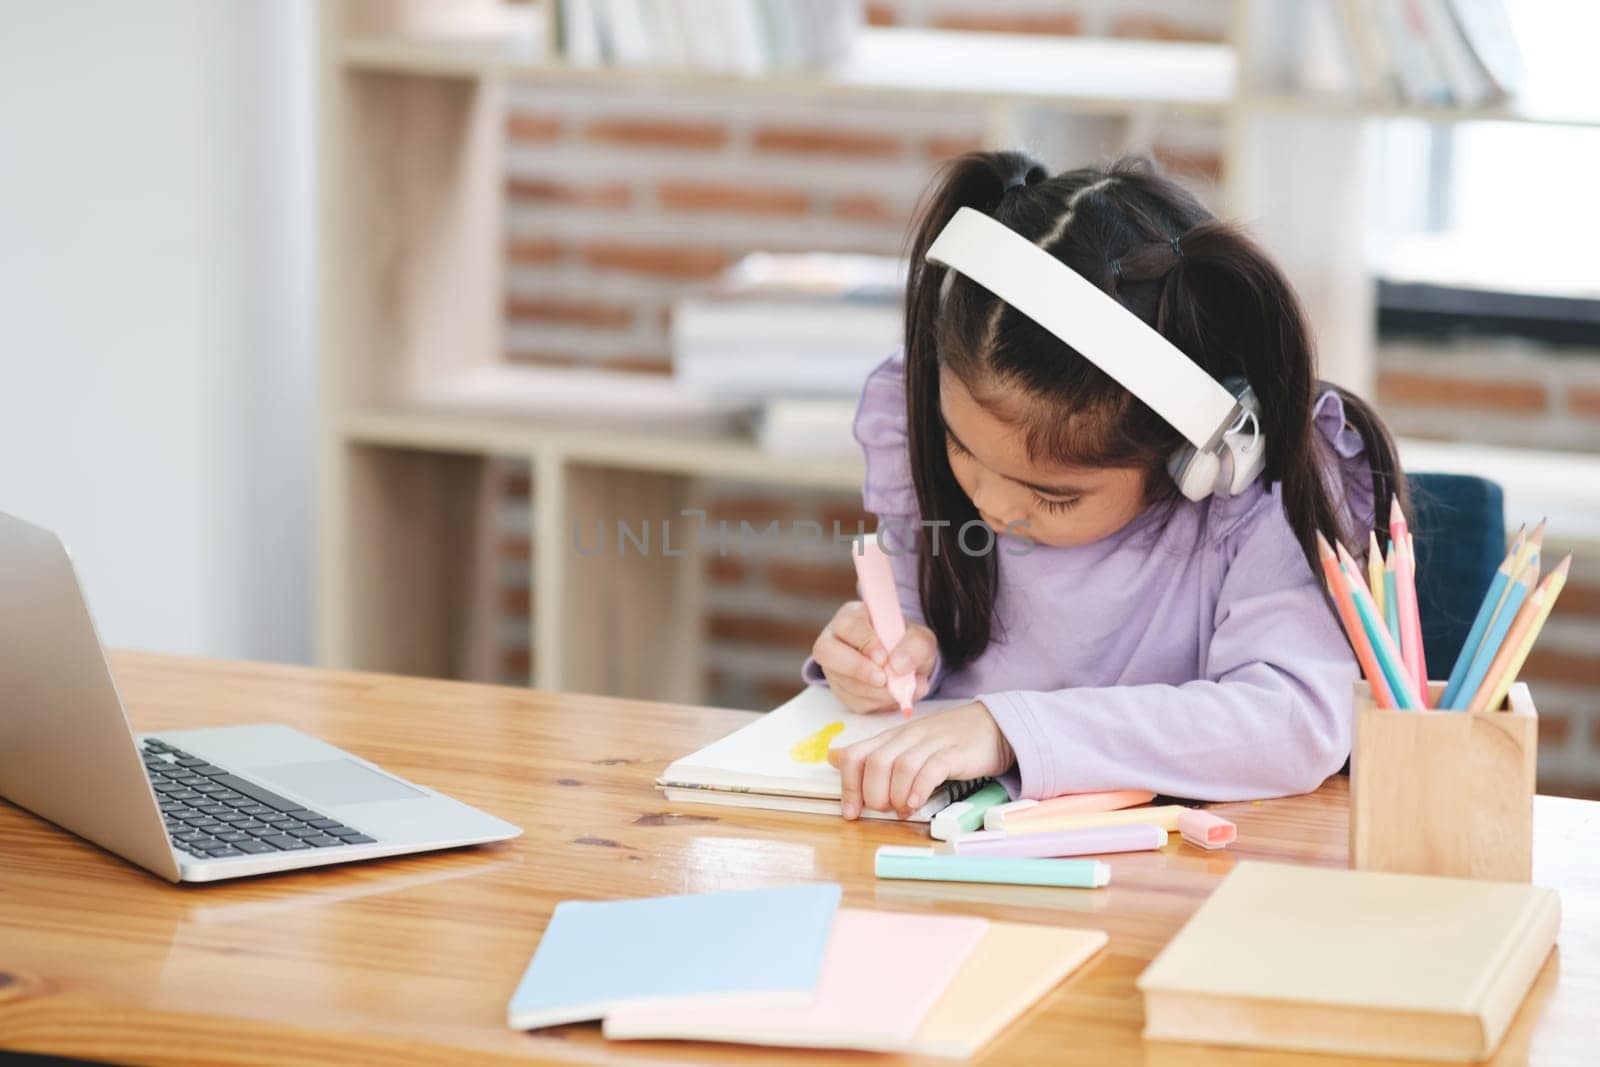 A young girl is sitting at a desk with a laptop and a notebook. She is drawing with markers and wearing headphones. The scene suggests that she is working on a project or assignment